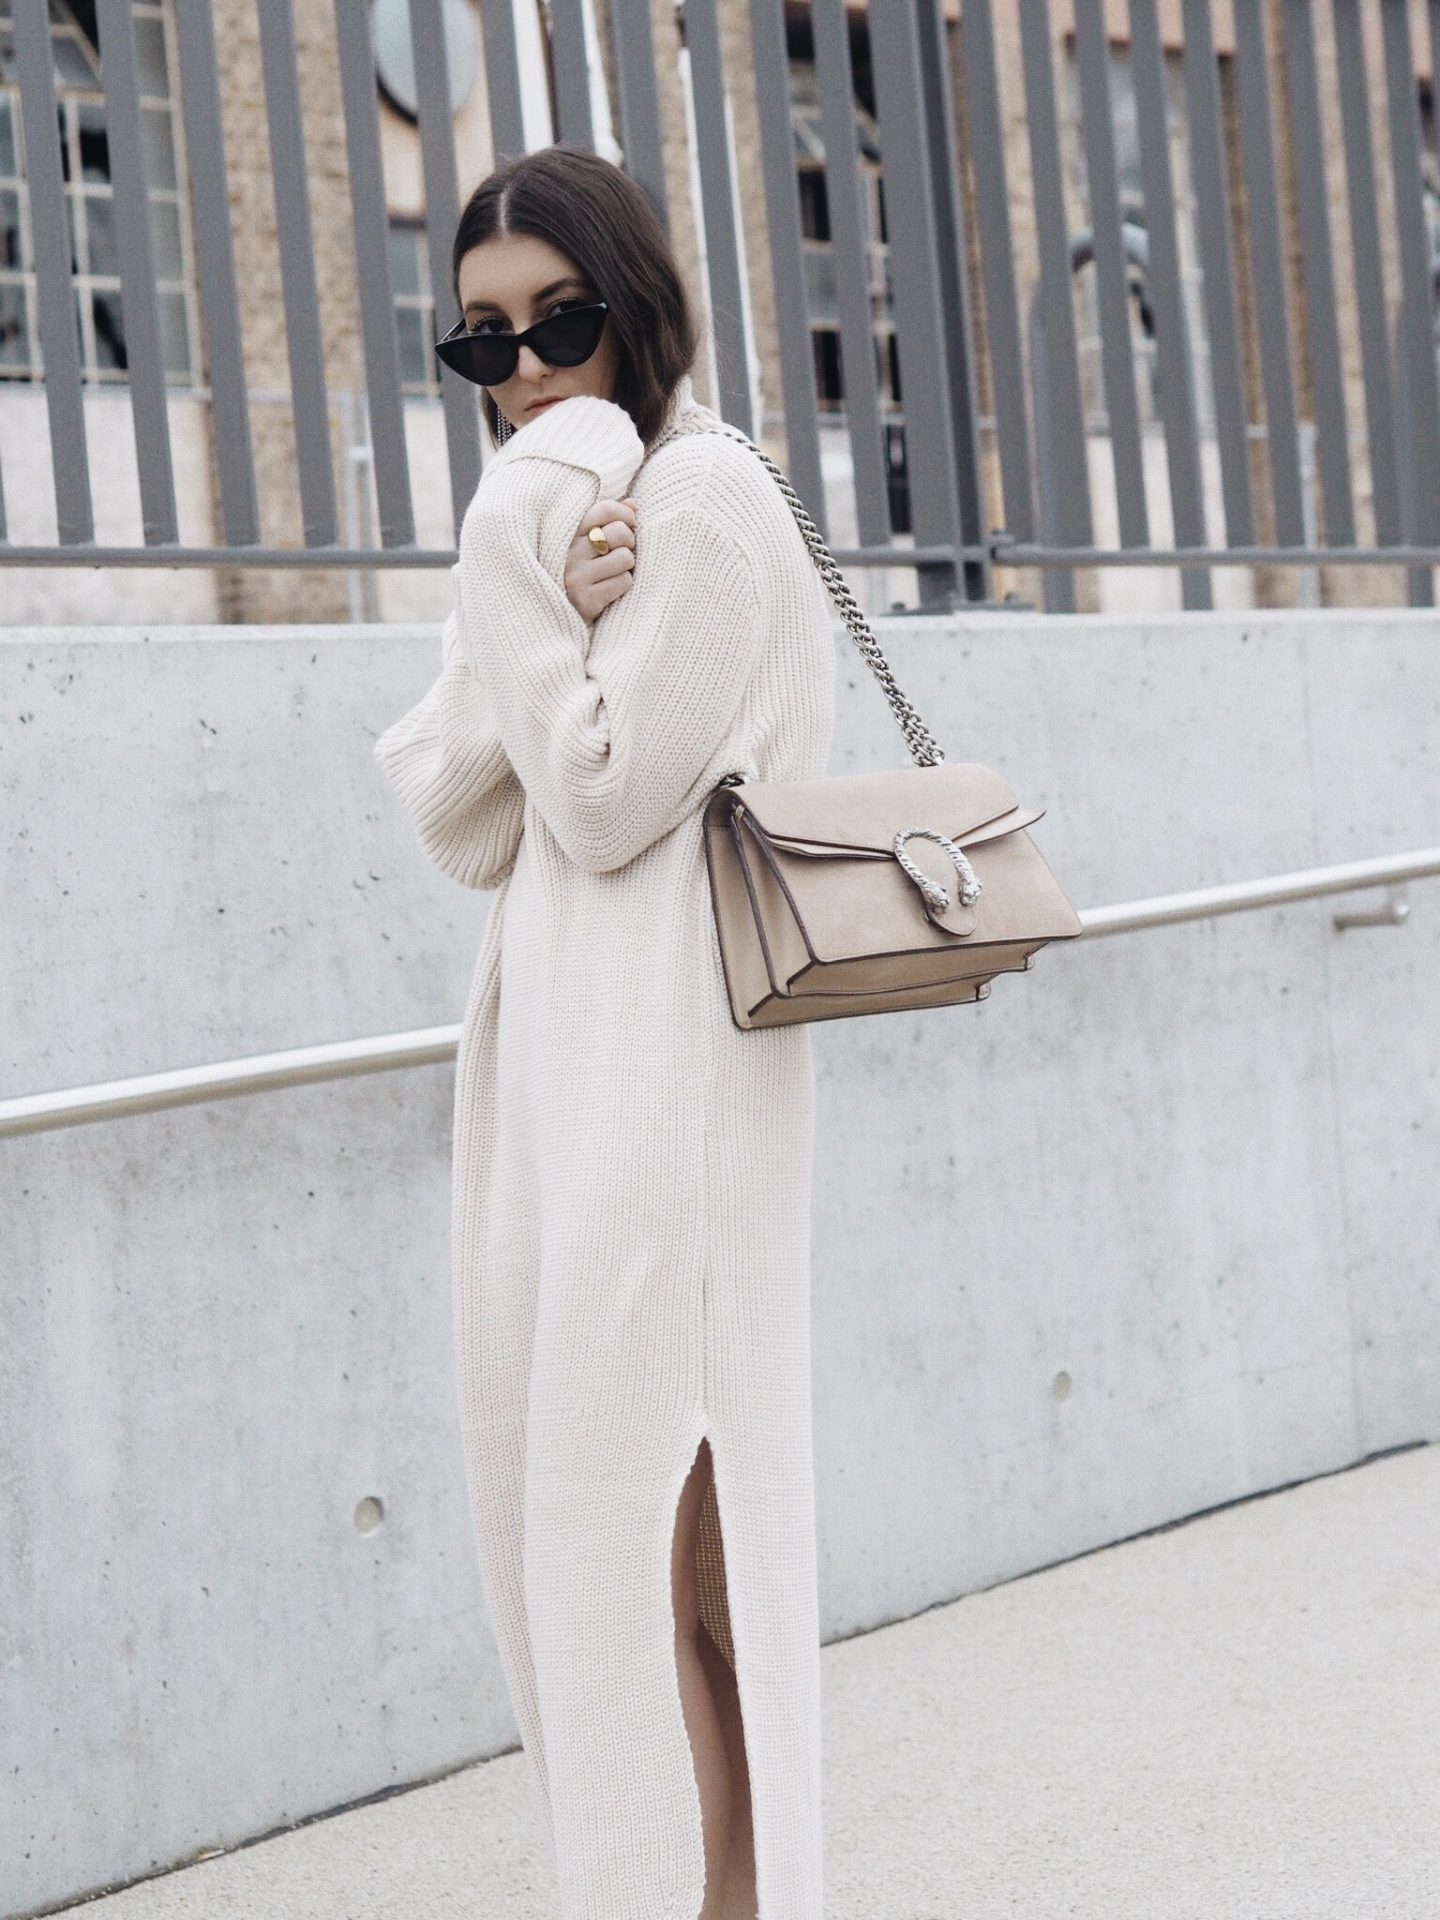 LATEST OBSESSION: KNITTED DRESSES